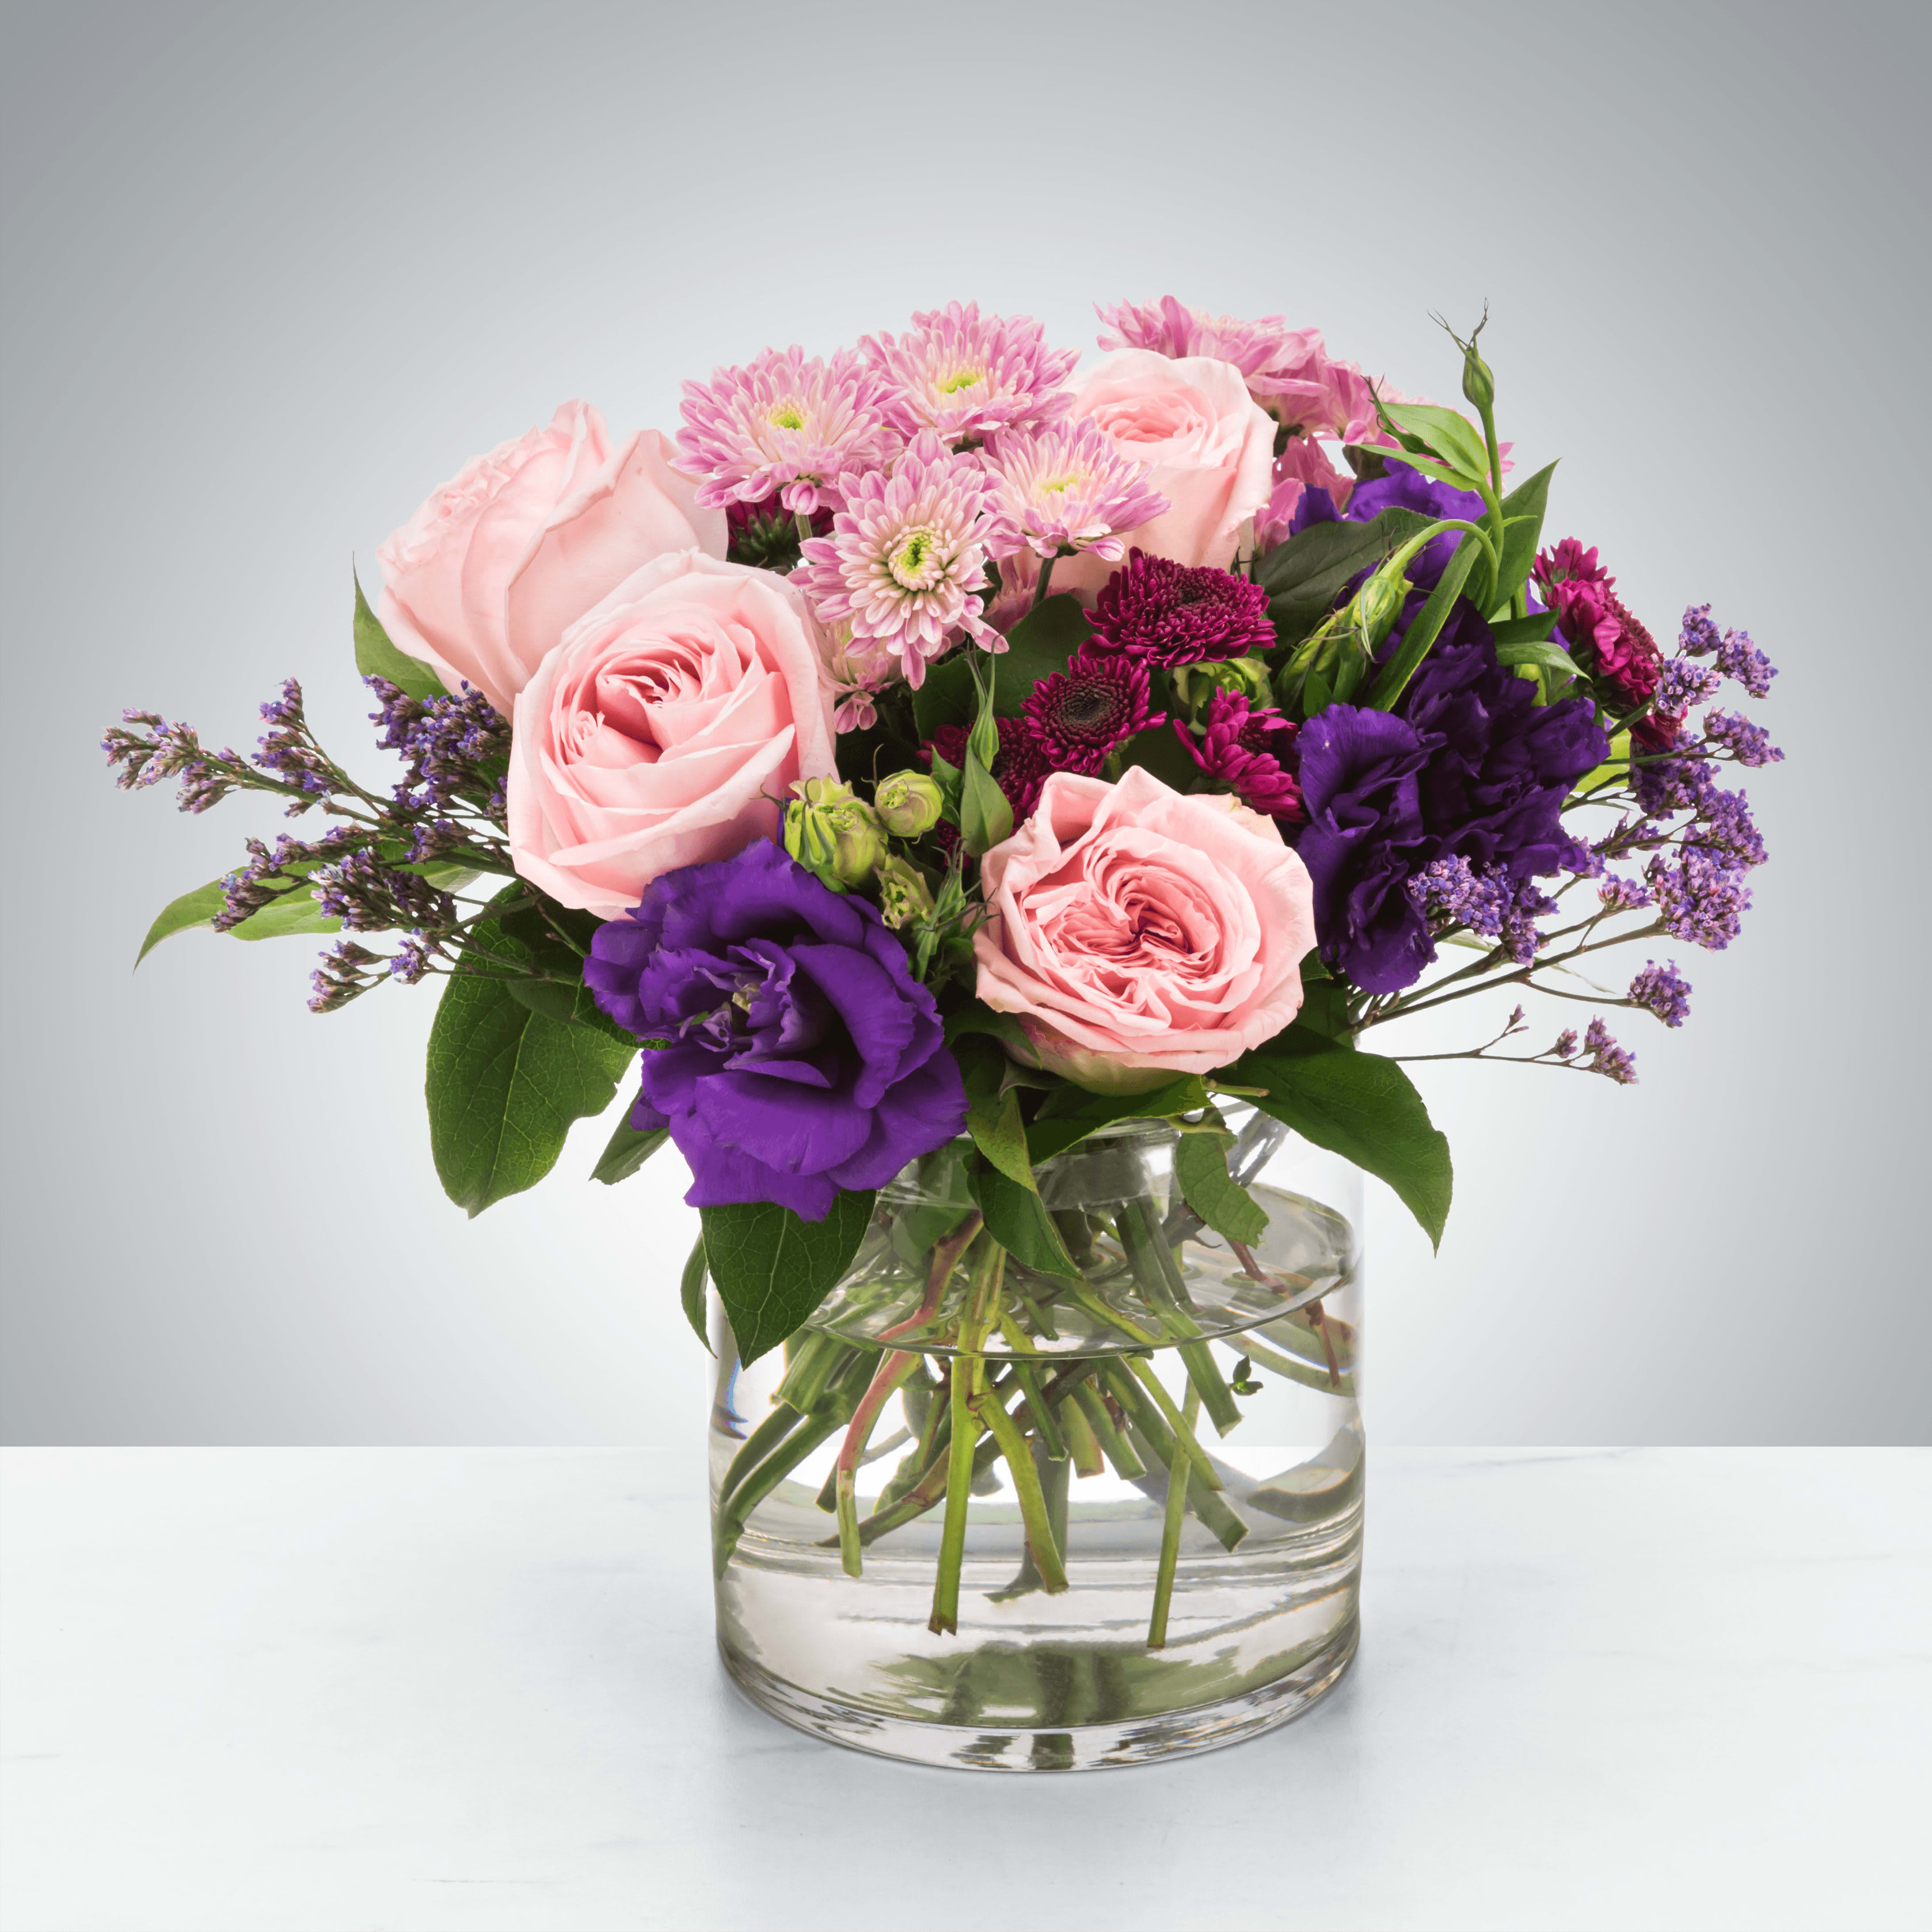 Coming Home - A selection of pink and purple flowers come together in an eye-pleasing arrangement. This arrangement makes a great gift for Mother's Day, Women's Day, or as a thinking of you present.  Approximate Dimensions: 10''D x 10''H